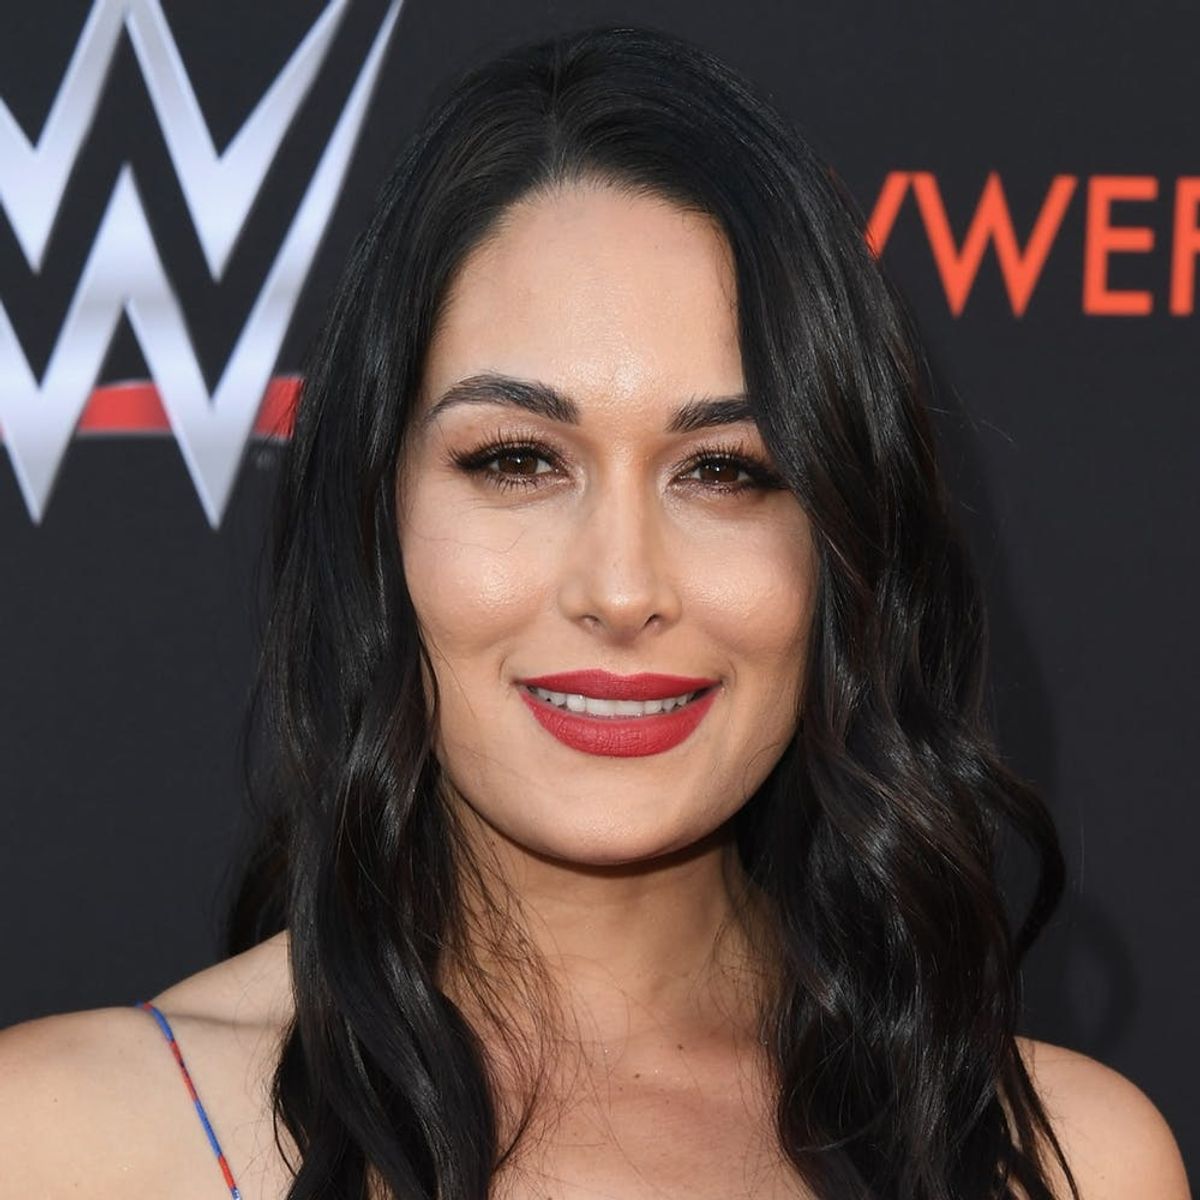 Brie Bella Weighs in on Those Nikki Bella and John Cena Reconciliation Rumors